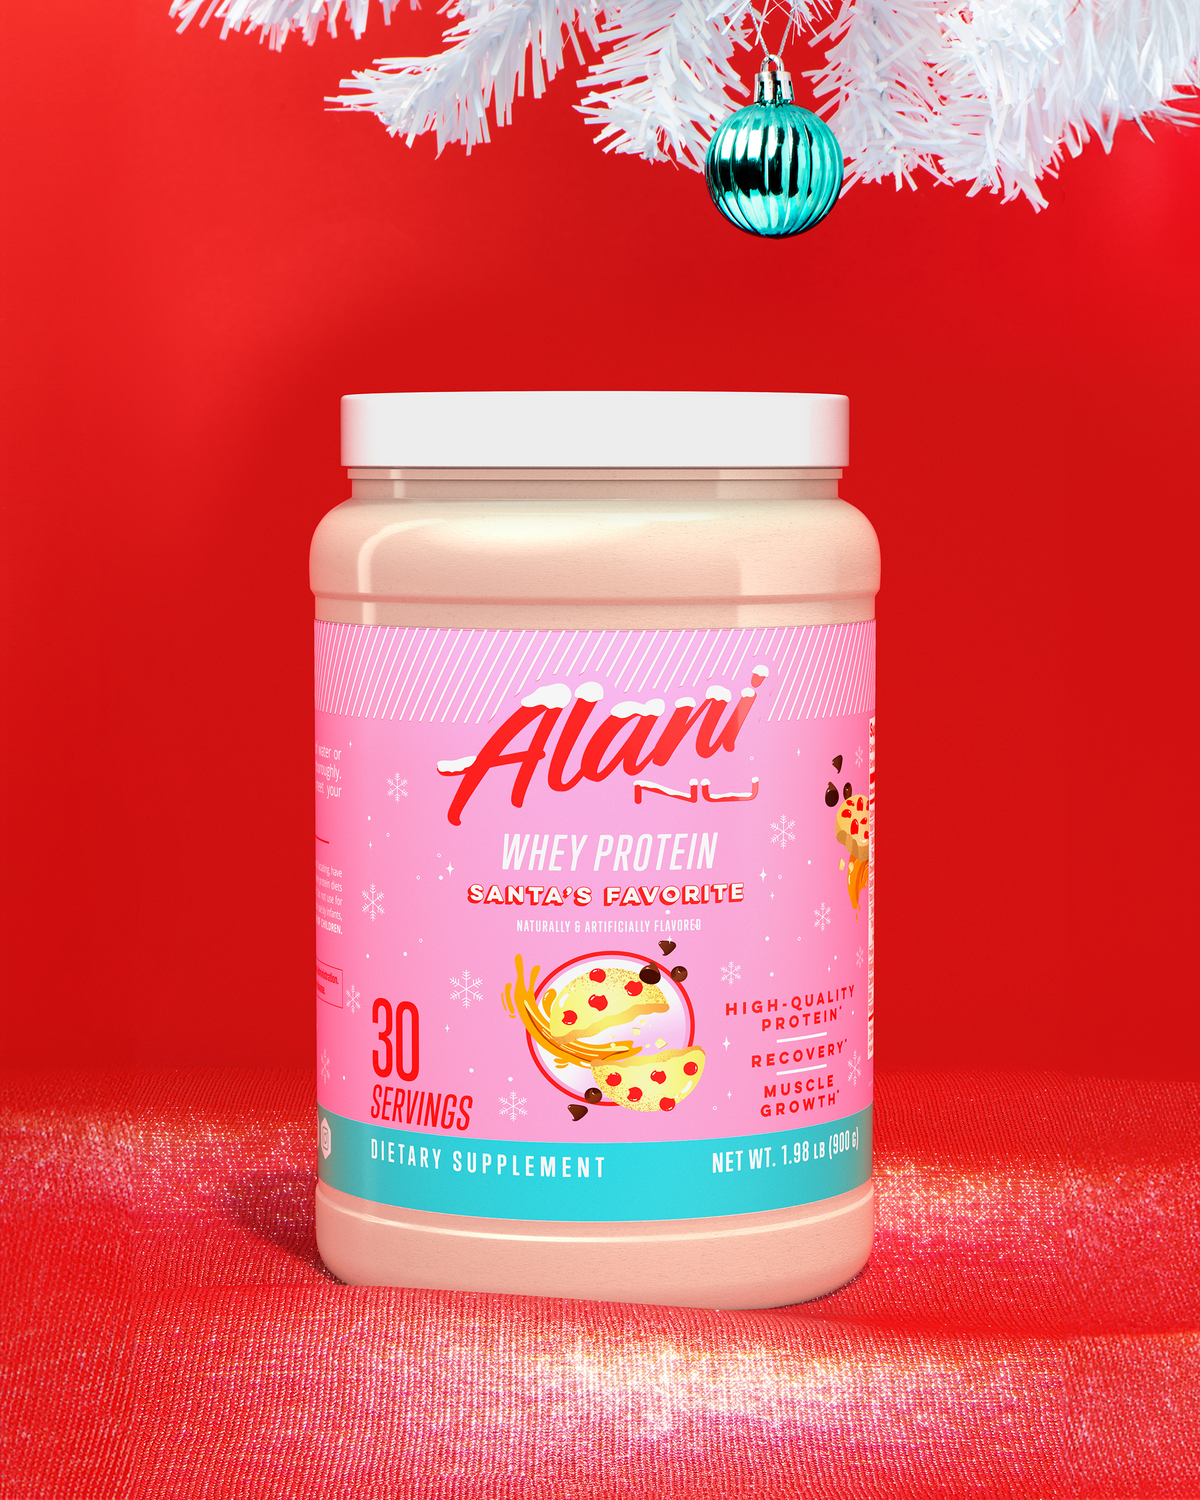 Alani Nu Protein Fit Shake, Munchies